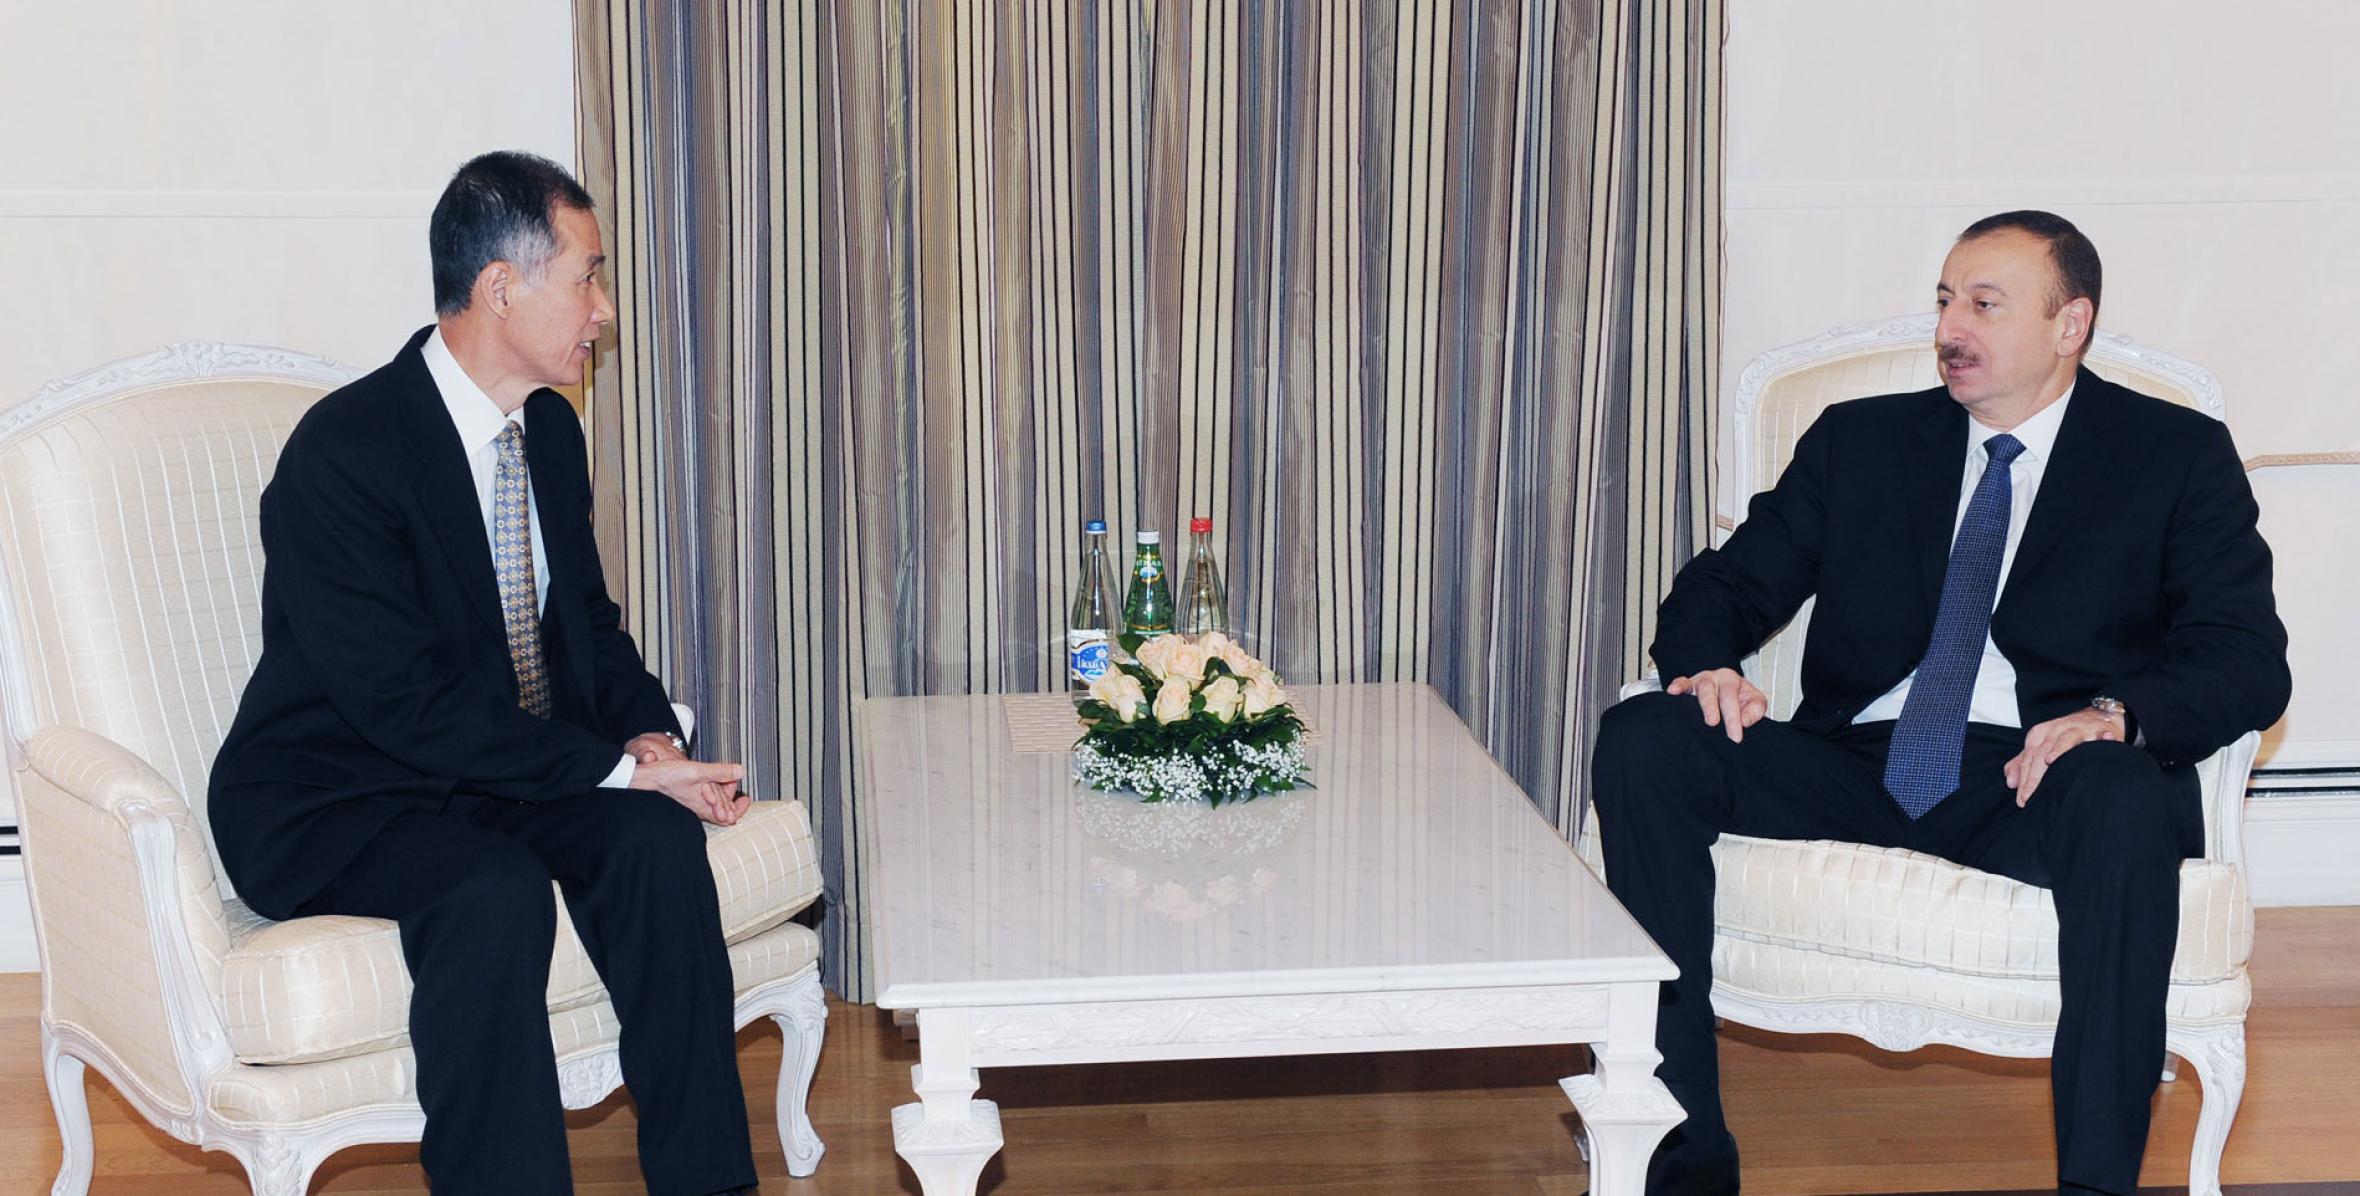 Ilham Aliyev received the Ambassador of China to Azerbaijan at the end of his diplomatic mission